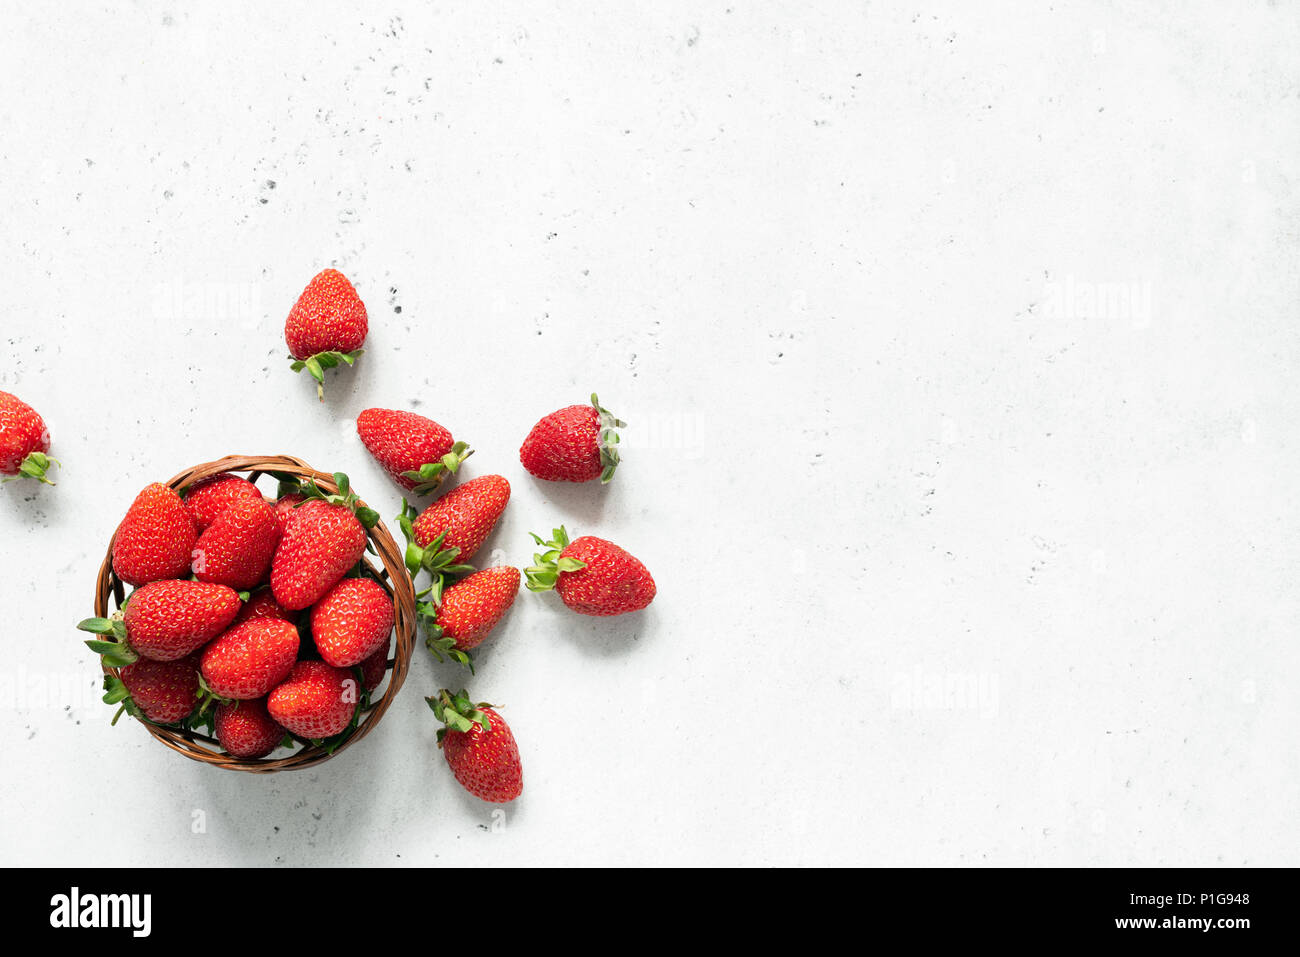 Fresh strawberry in bowl on bright gray concrete background. Strawberries in a bowl. Top view of fresh juicy strawberries Stock Photo